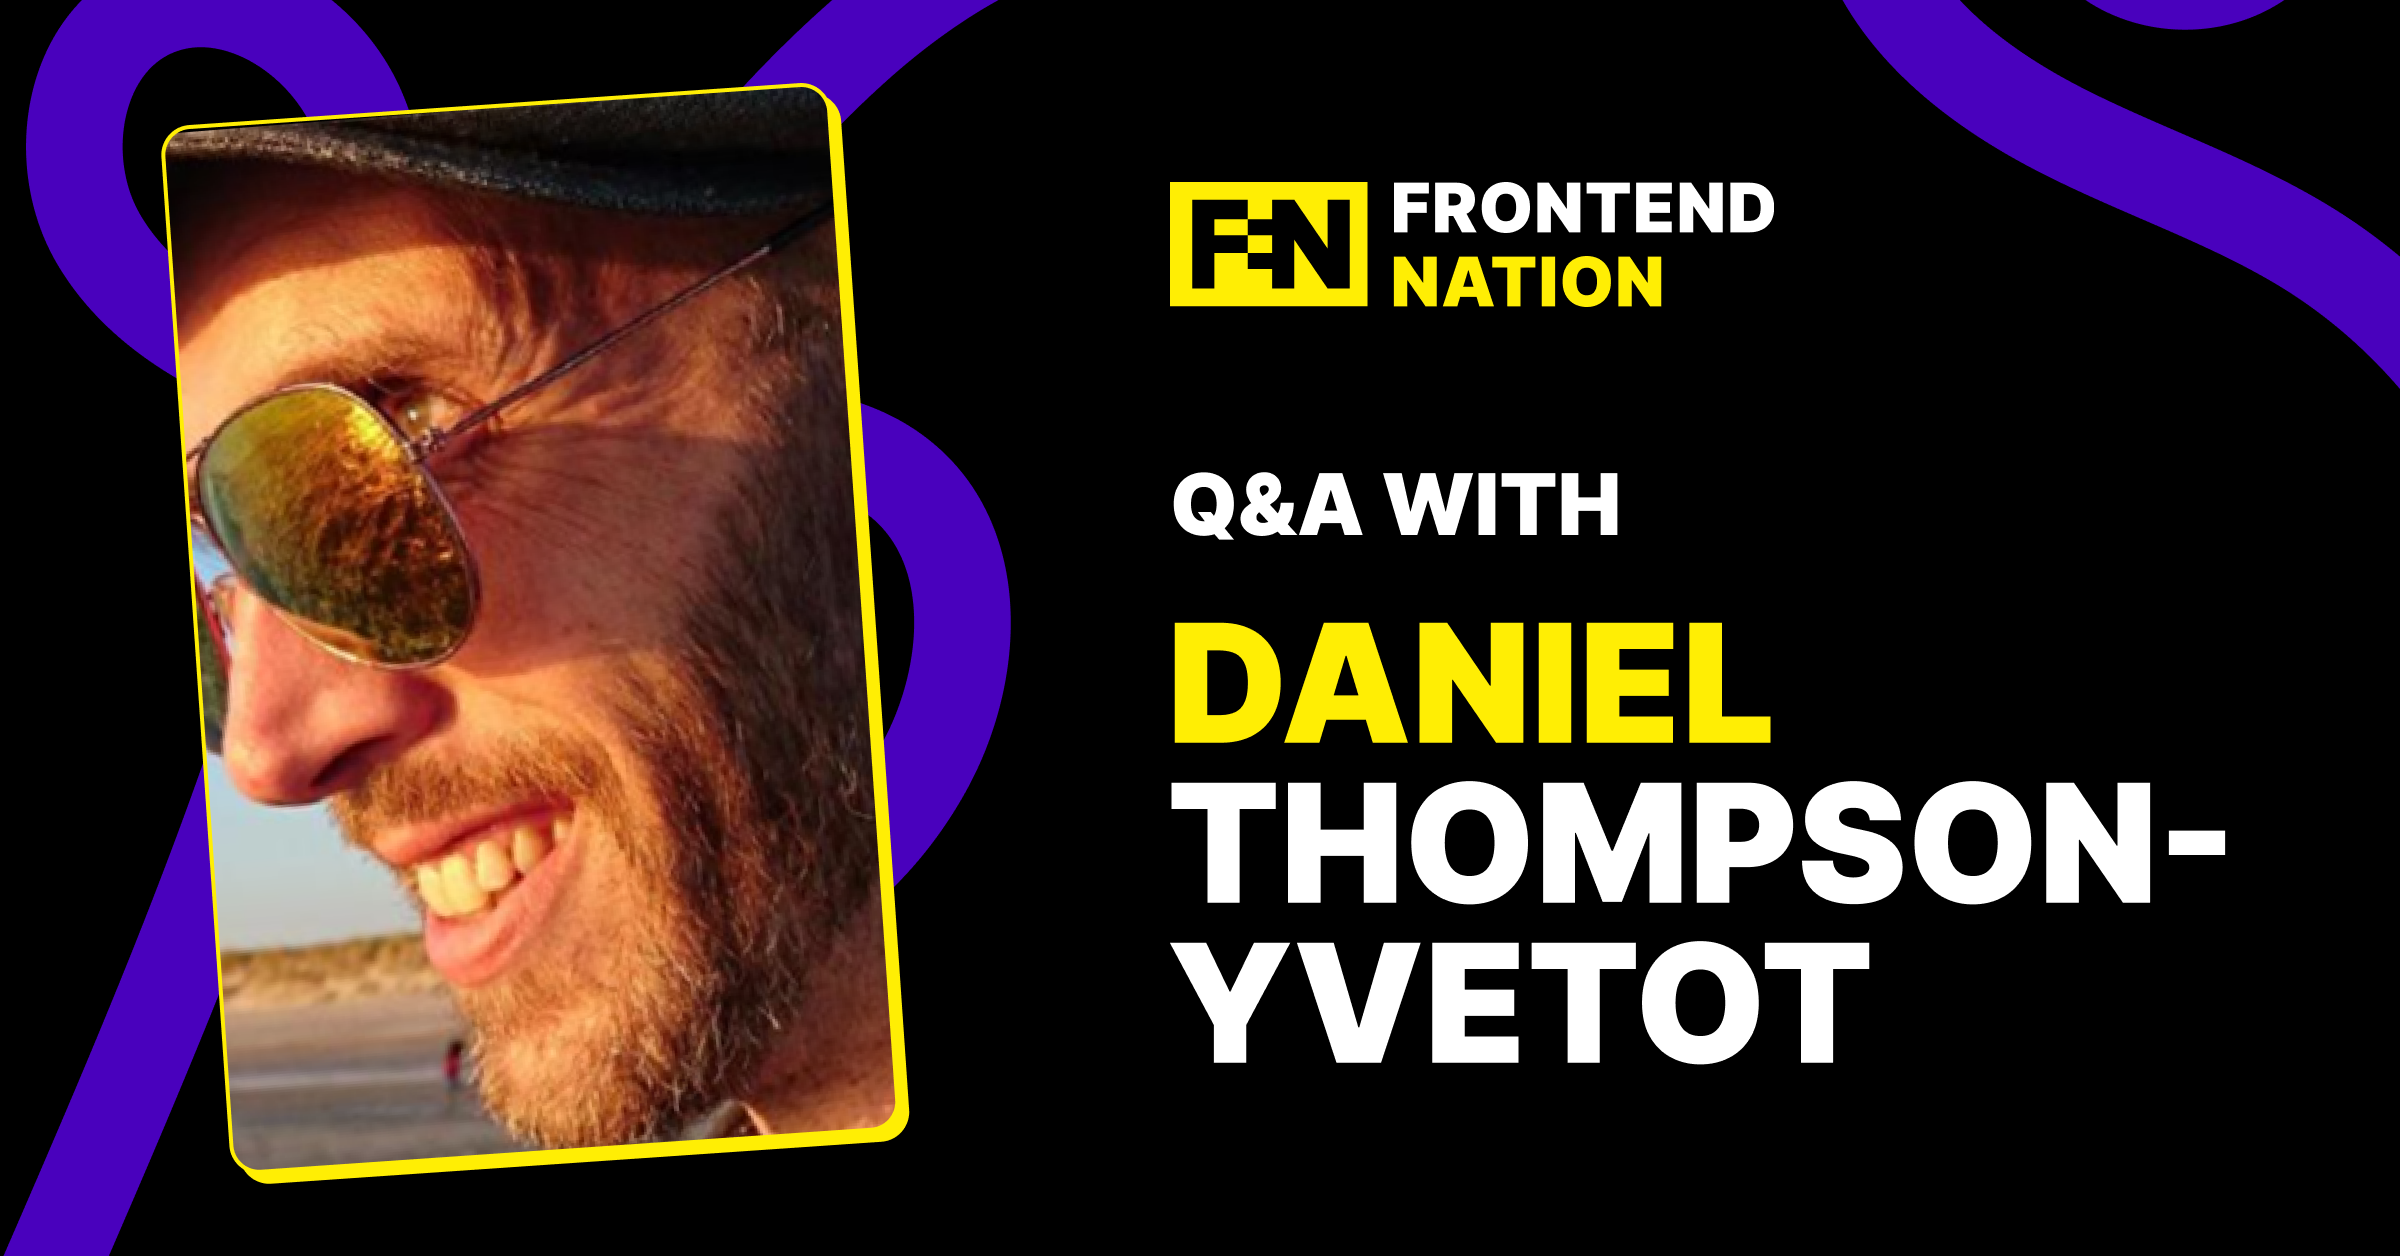 Building Better Desktop Apps with Tauri: Q&A with Daniel Thompson-Yvetot